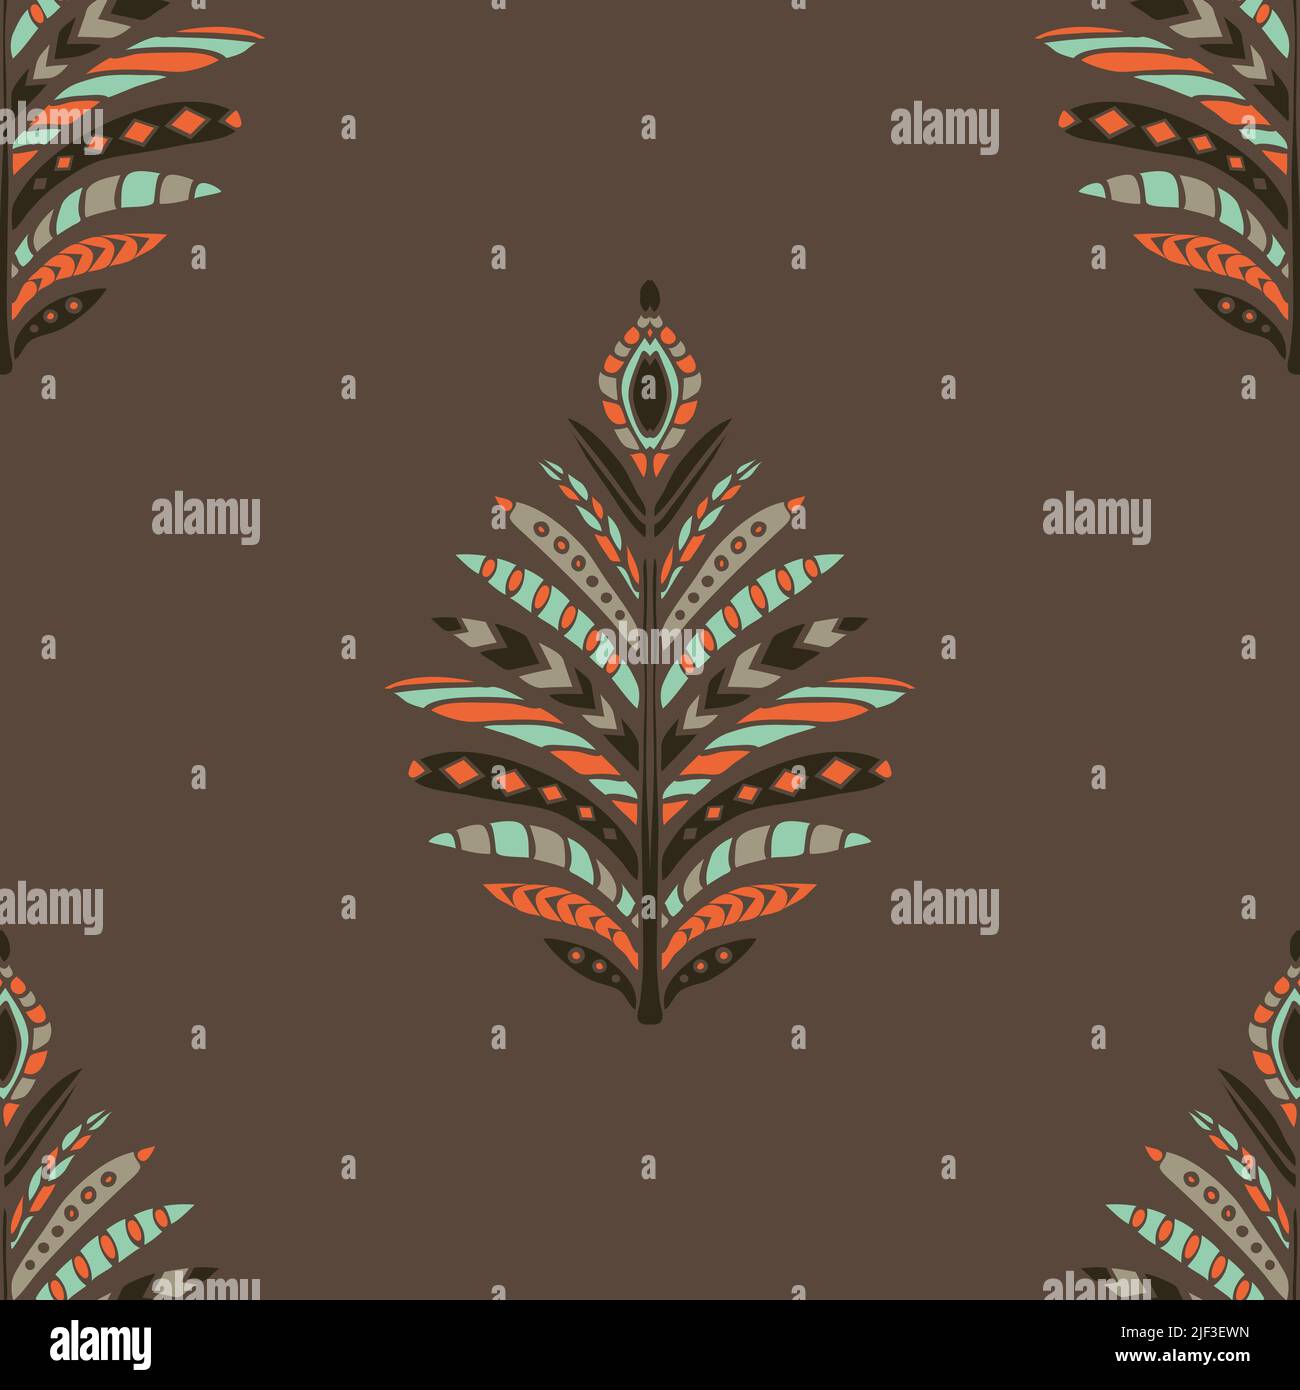 Seamless vector pattern with native feather on brown background. Simple tribal symbol wallpaper design. Decorative vintage Aztec fashion textile. Stock Vector